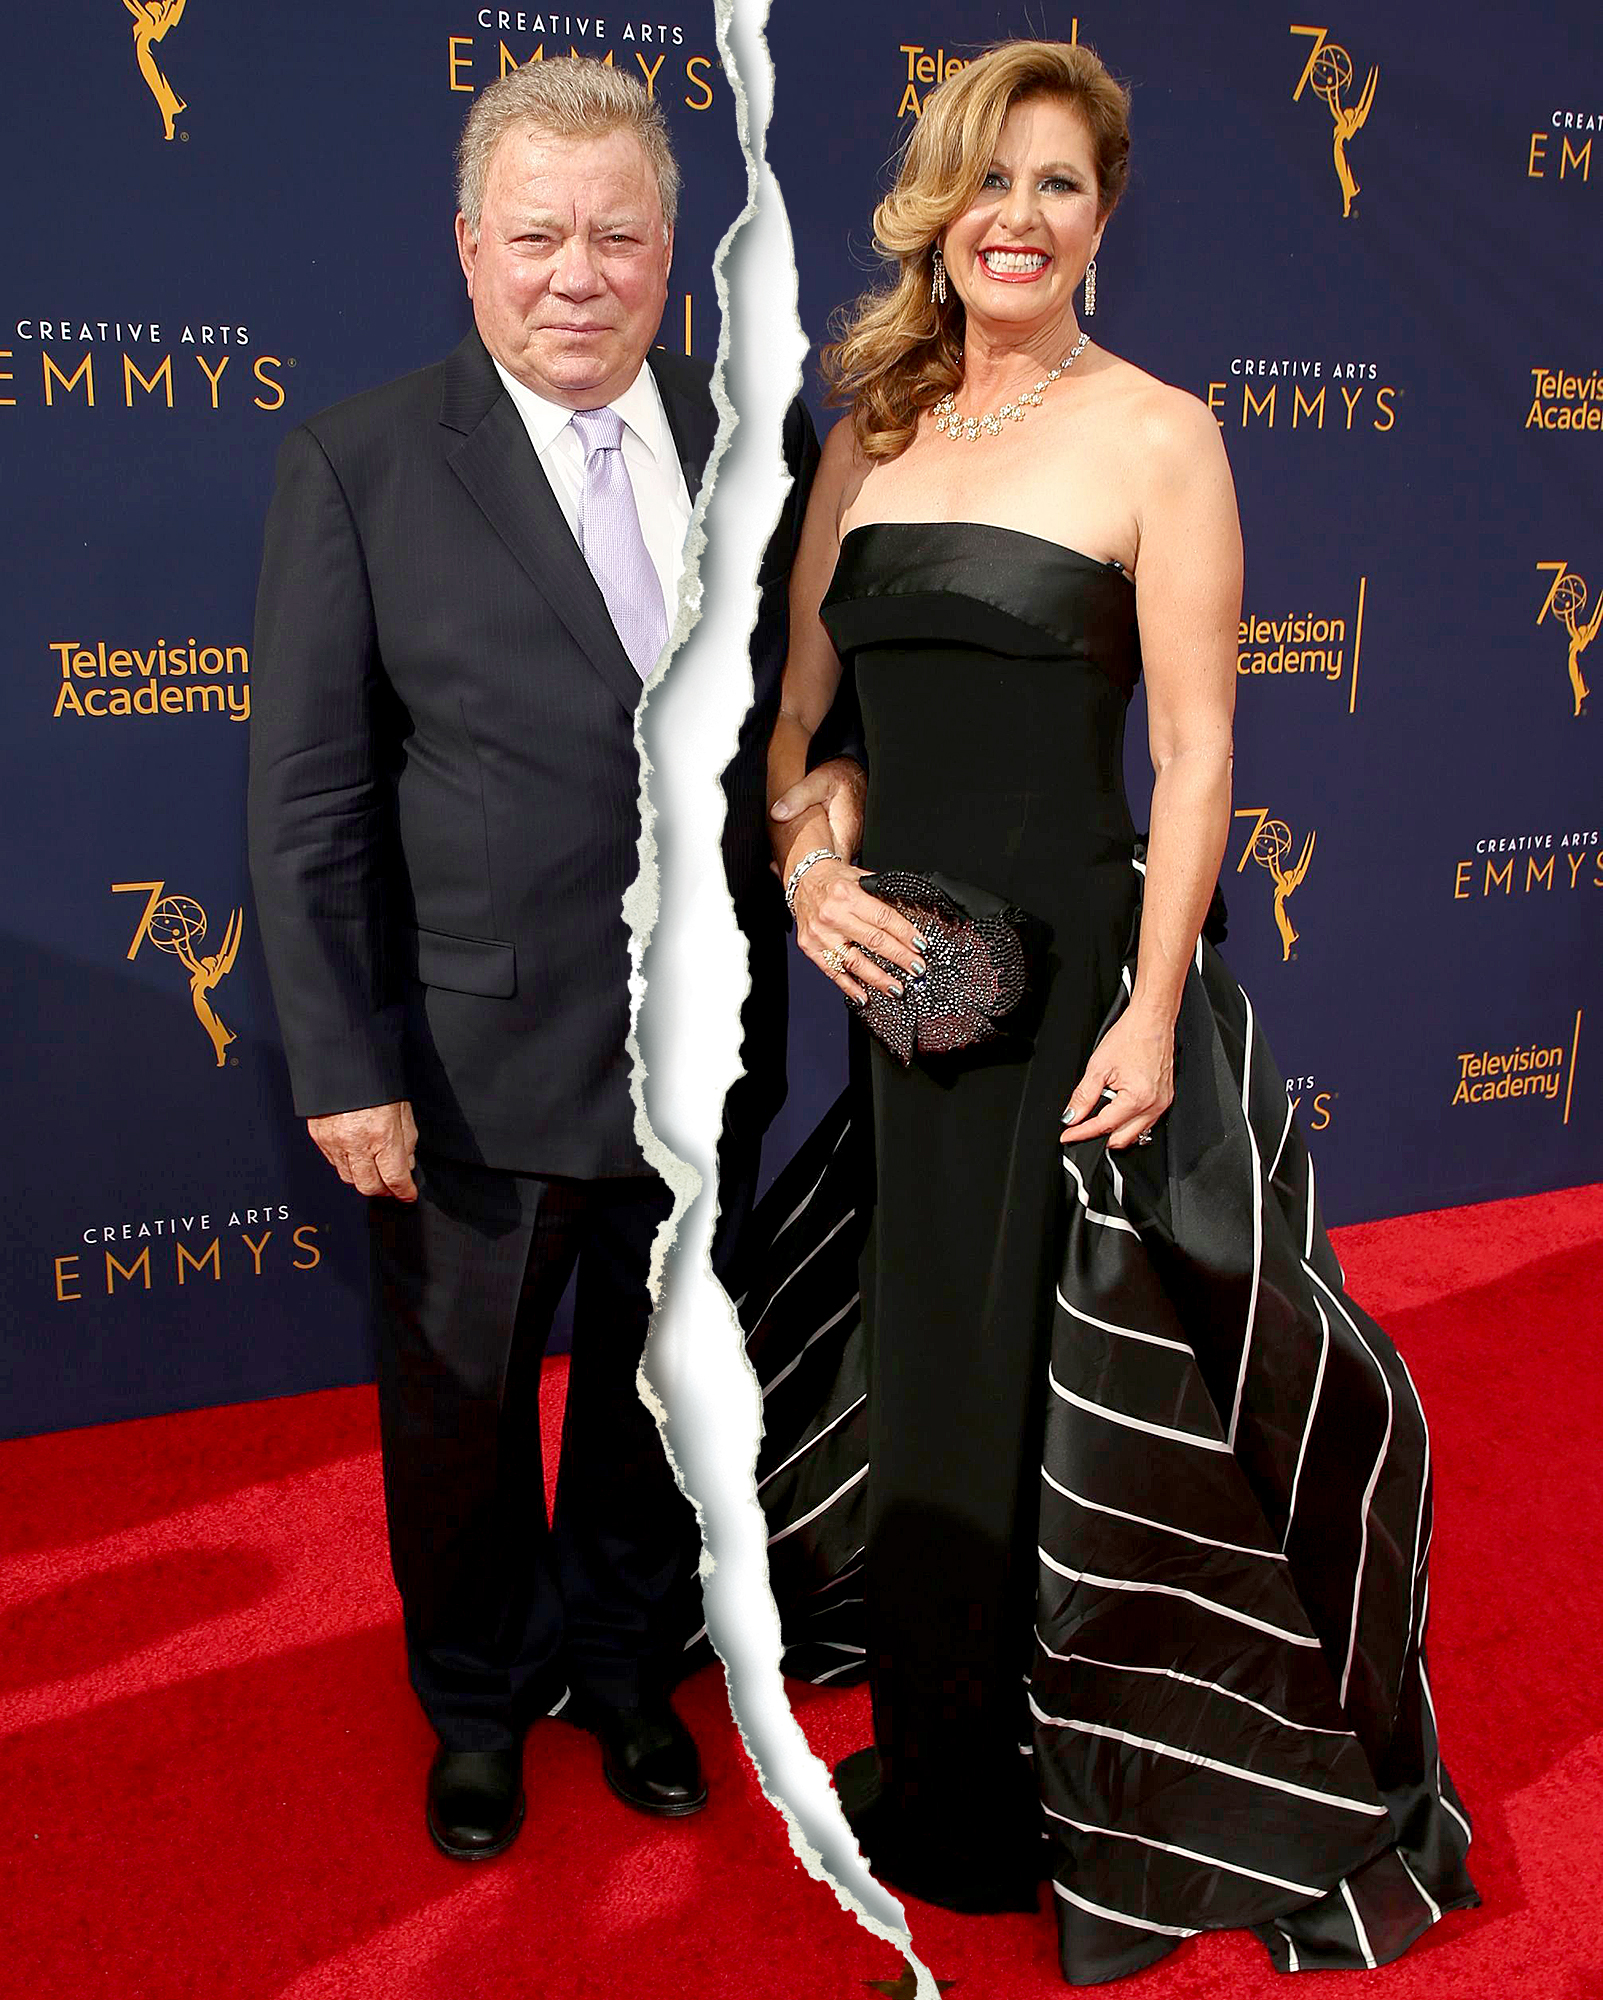 William Shatner Divorcing Wife Elizabeth After 18 Years of Marriage